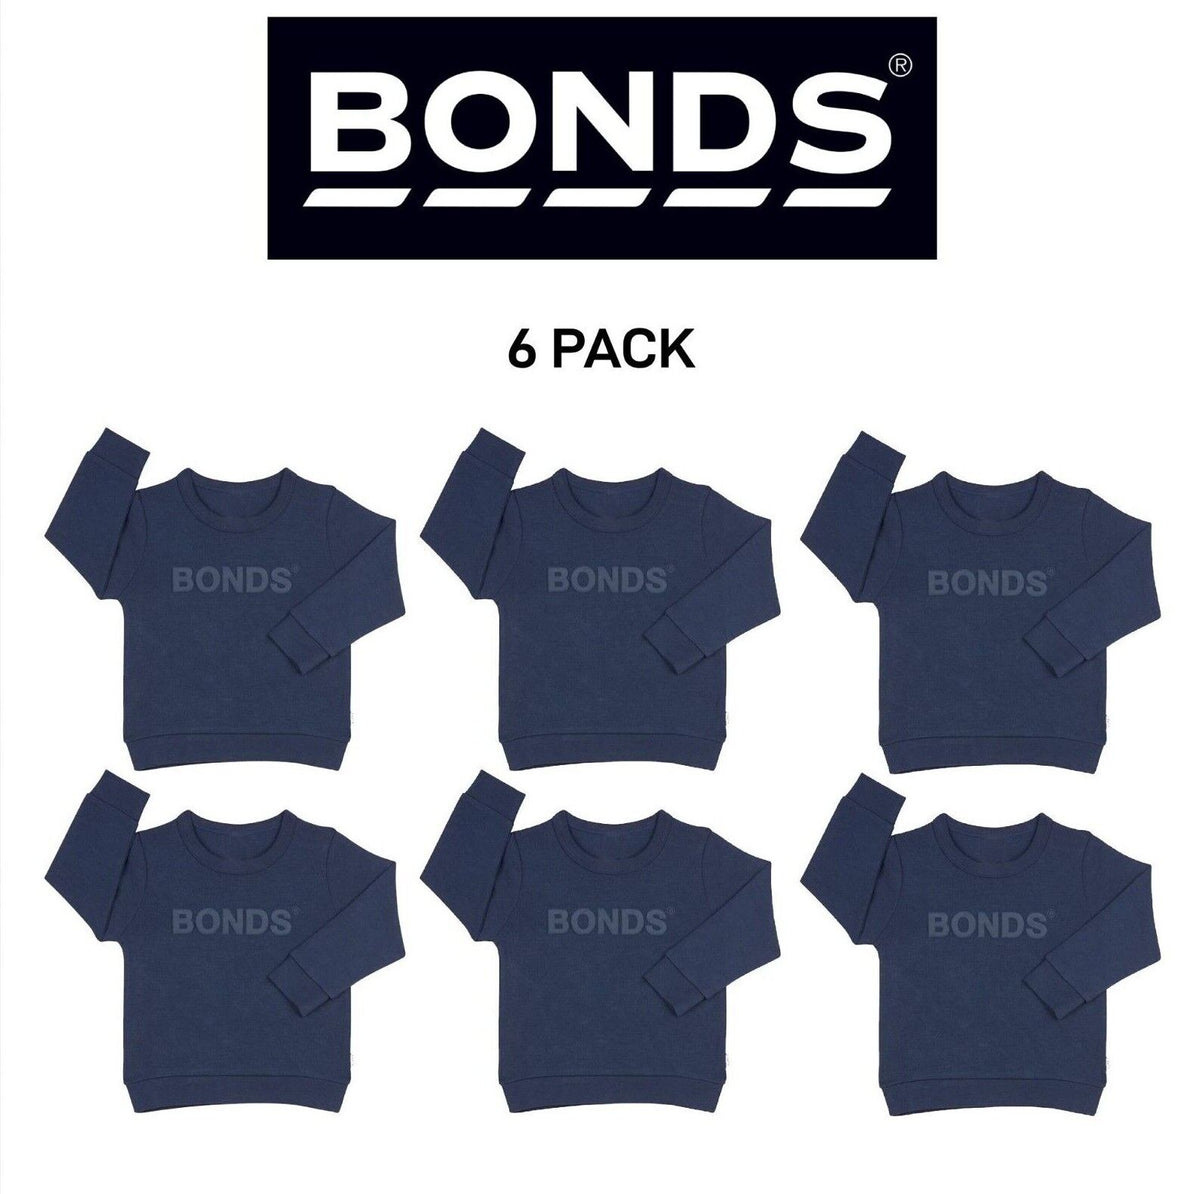 Bonds Baby Tech Sweats Pullover Ultimate Warm Comfort Sporty Style 6 Pack KVQTA